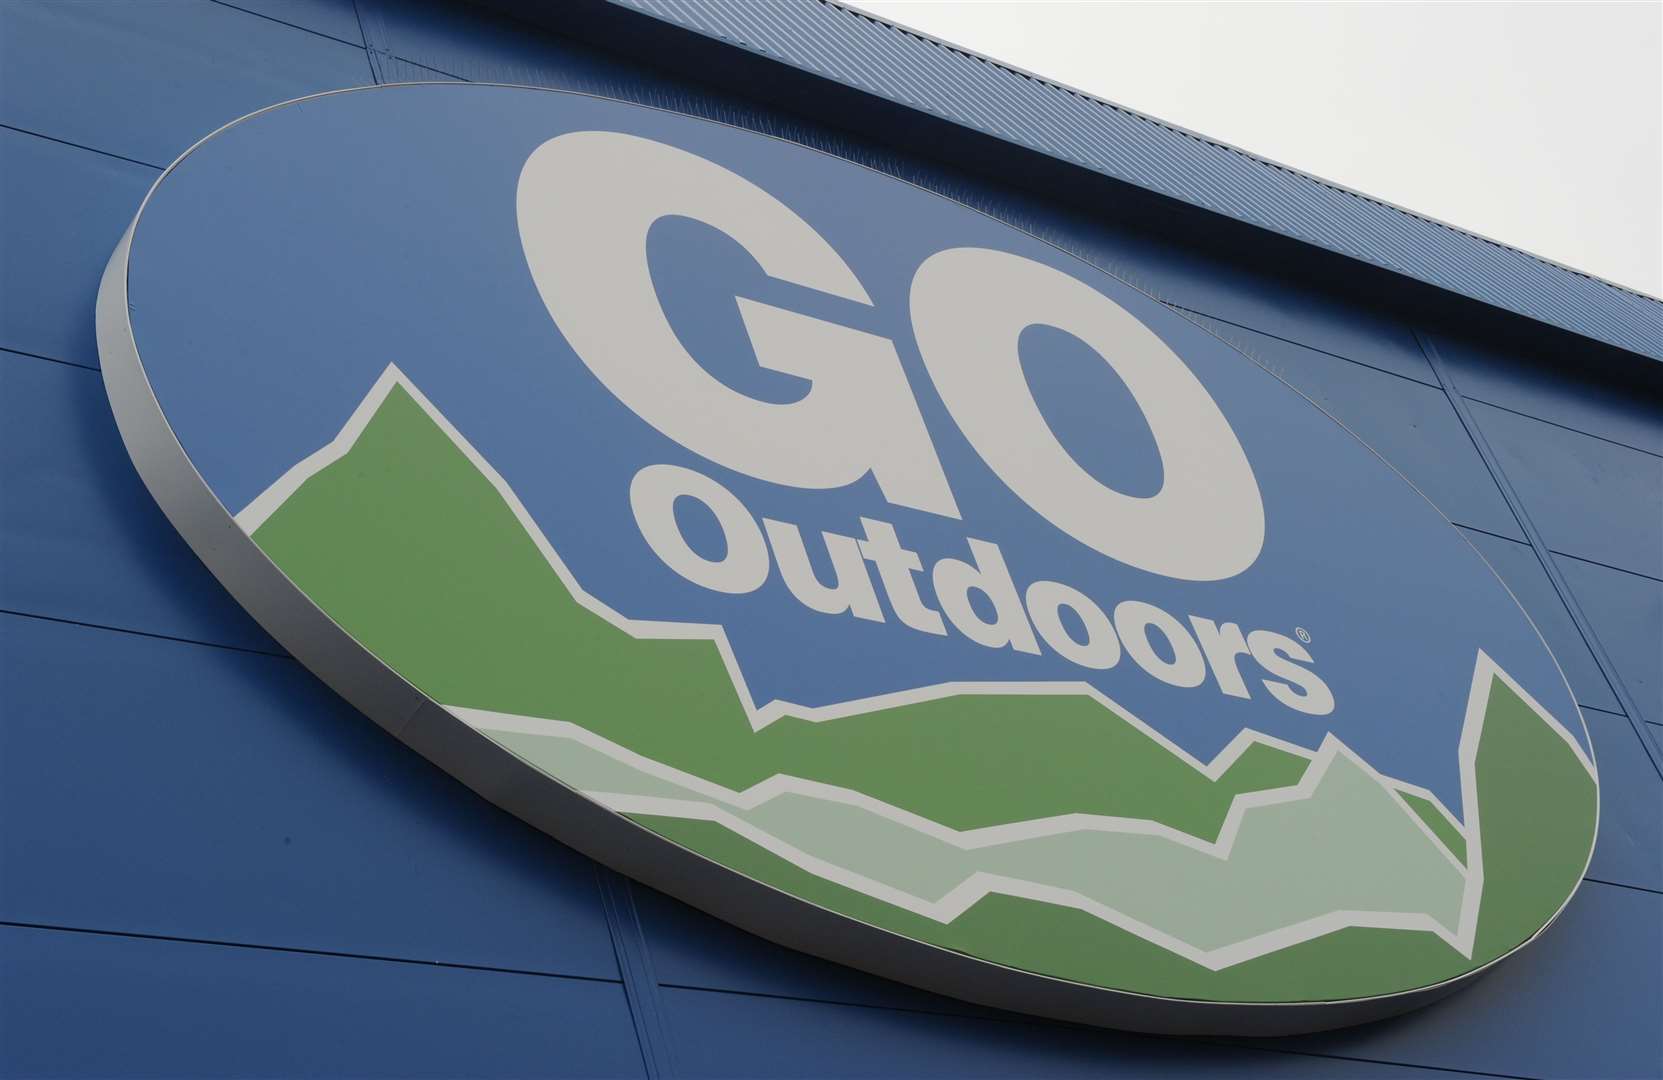 Go Outdoors, The Brook, Chatham is closing its doors permanently this weekend